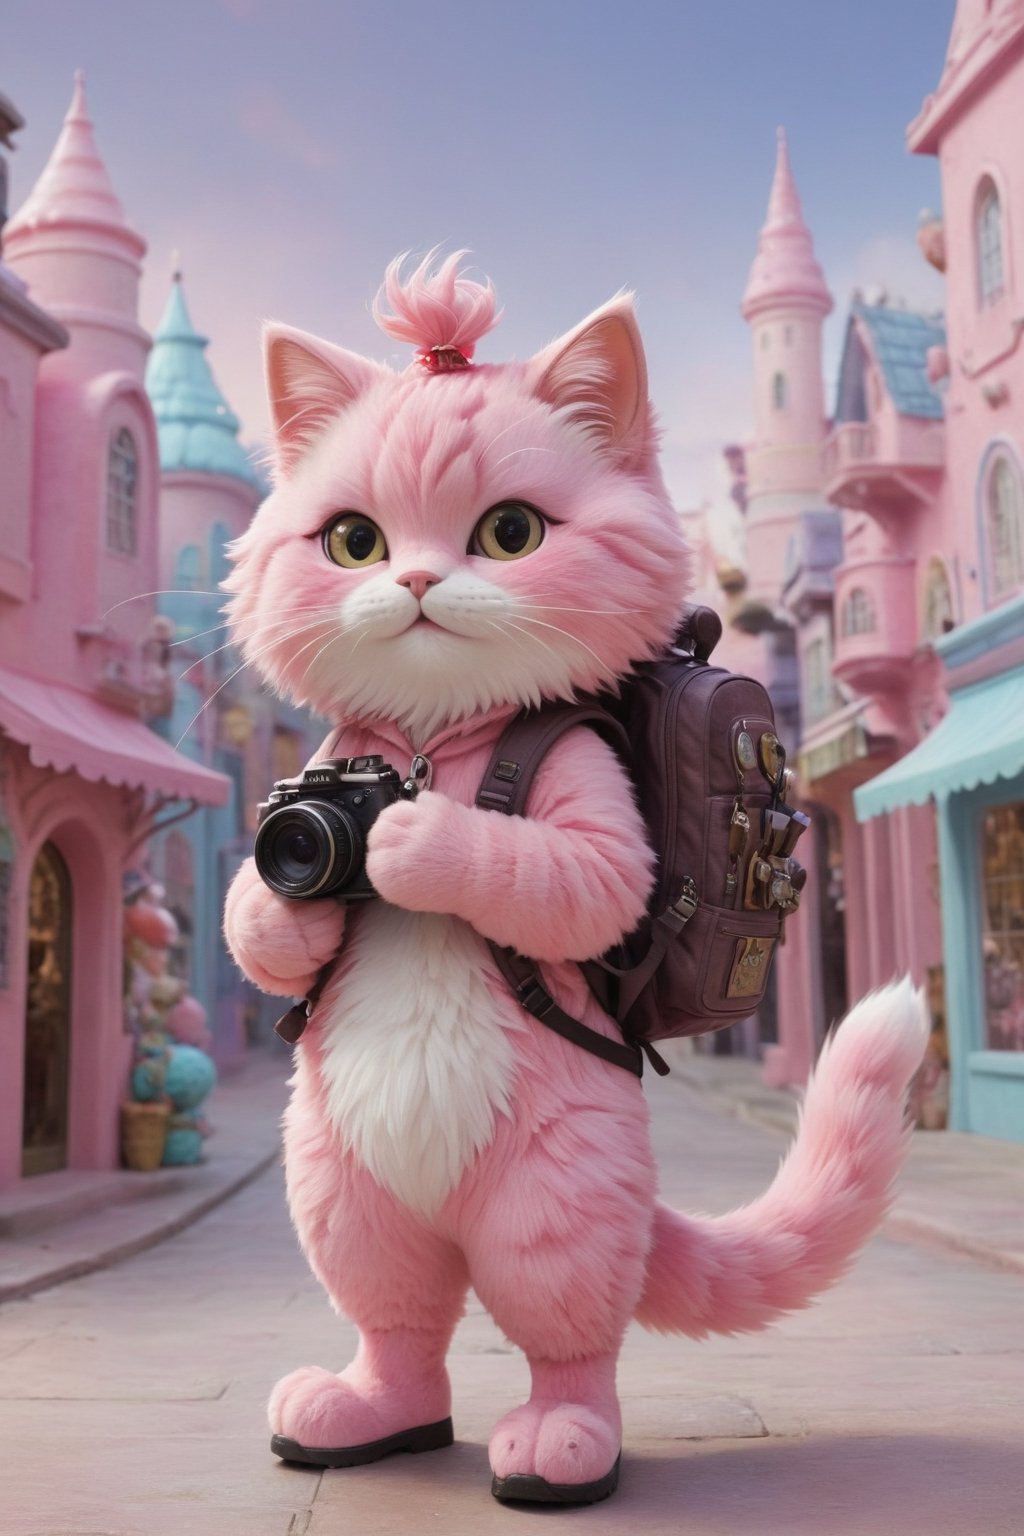 tiny pink cat with big giant backpack with camera in hands character, full body,  big puffu tail (((art by Aaron Jasinski))),   Enchanted Masterpiece, fantasy-core, Award-Winning, Masterpiece, contrast, faded , soft colors, Enchanted Masterpiece, Award-Winning, Masterpiece, contrast, faded, city 
and ice cream shope background
    ,more detail XL